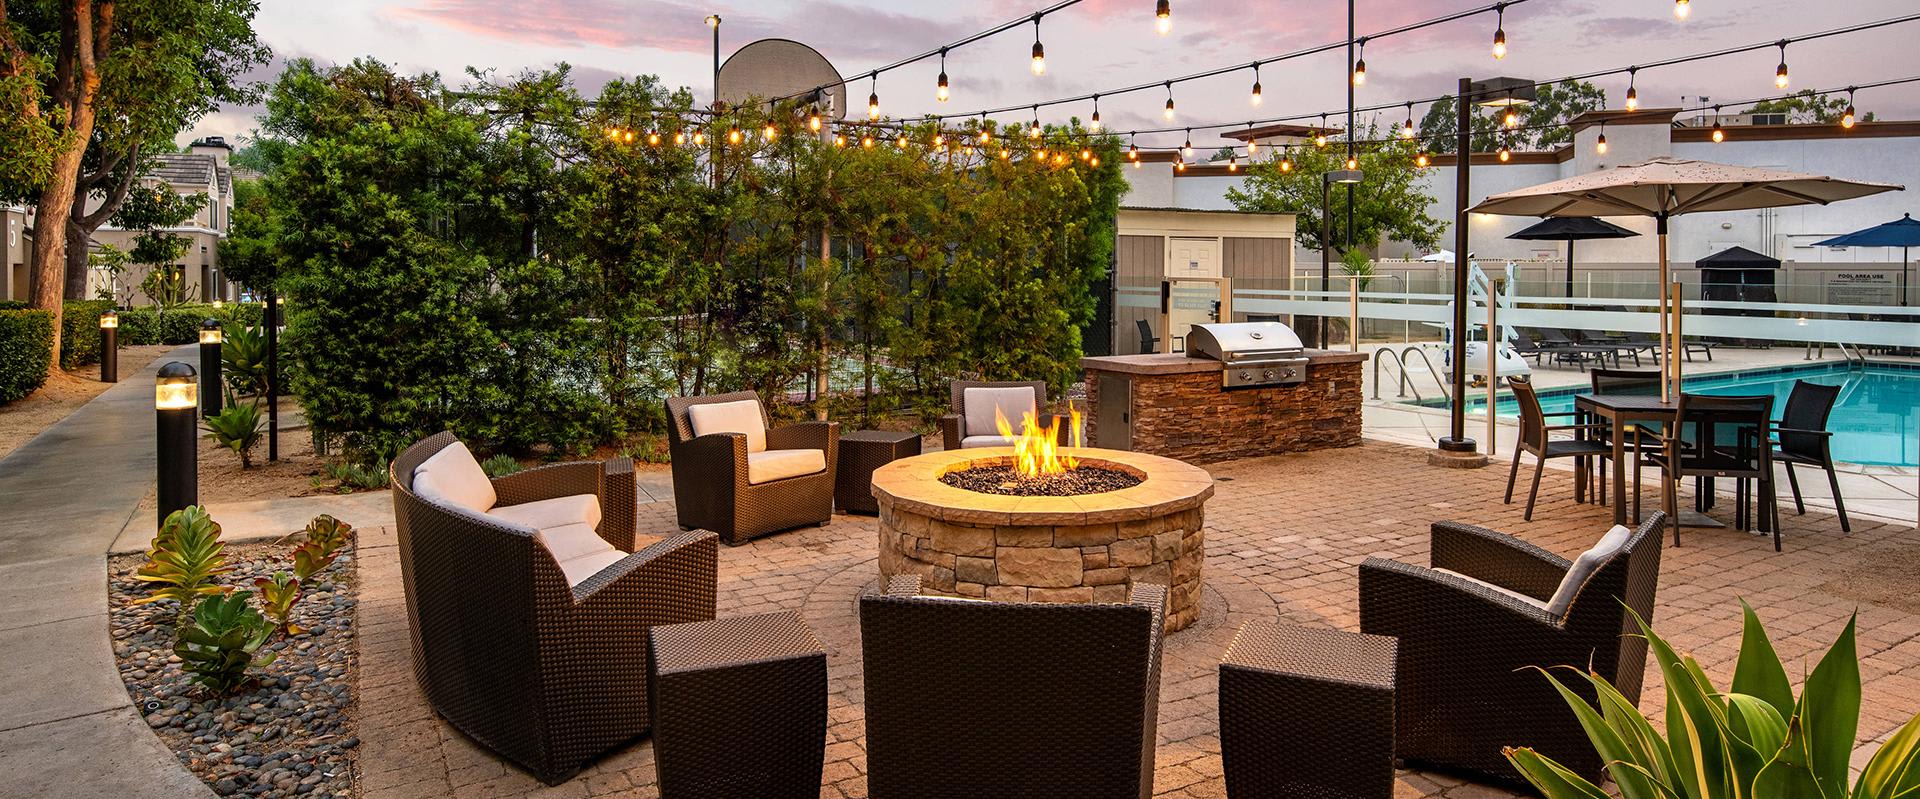 Outdoor Patio and Firepit